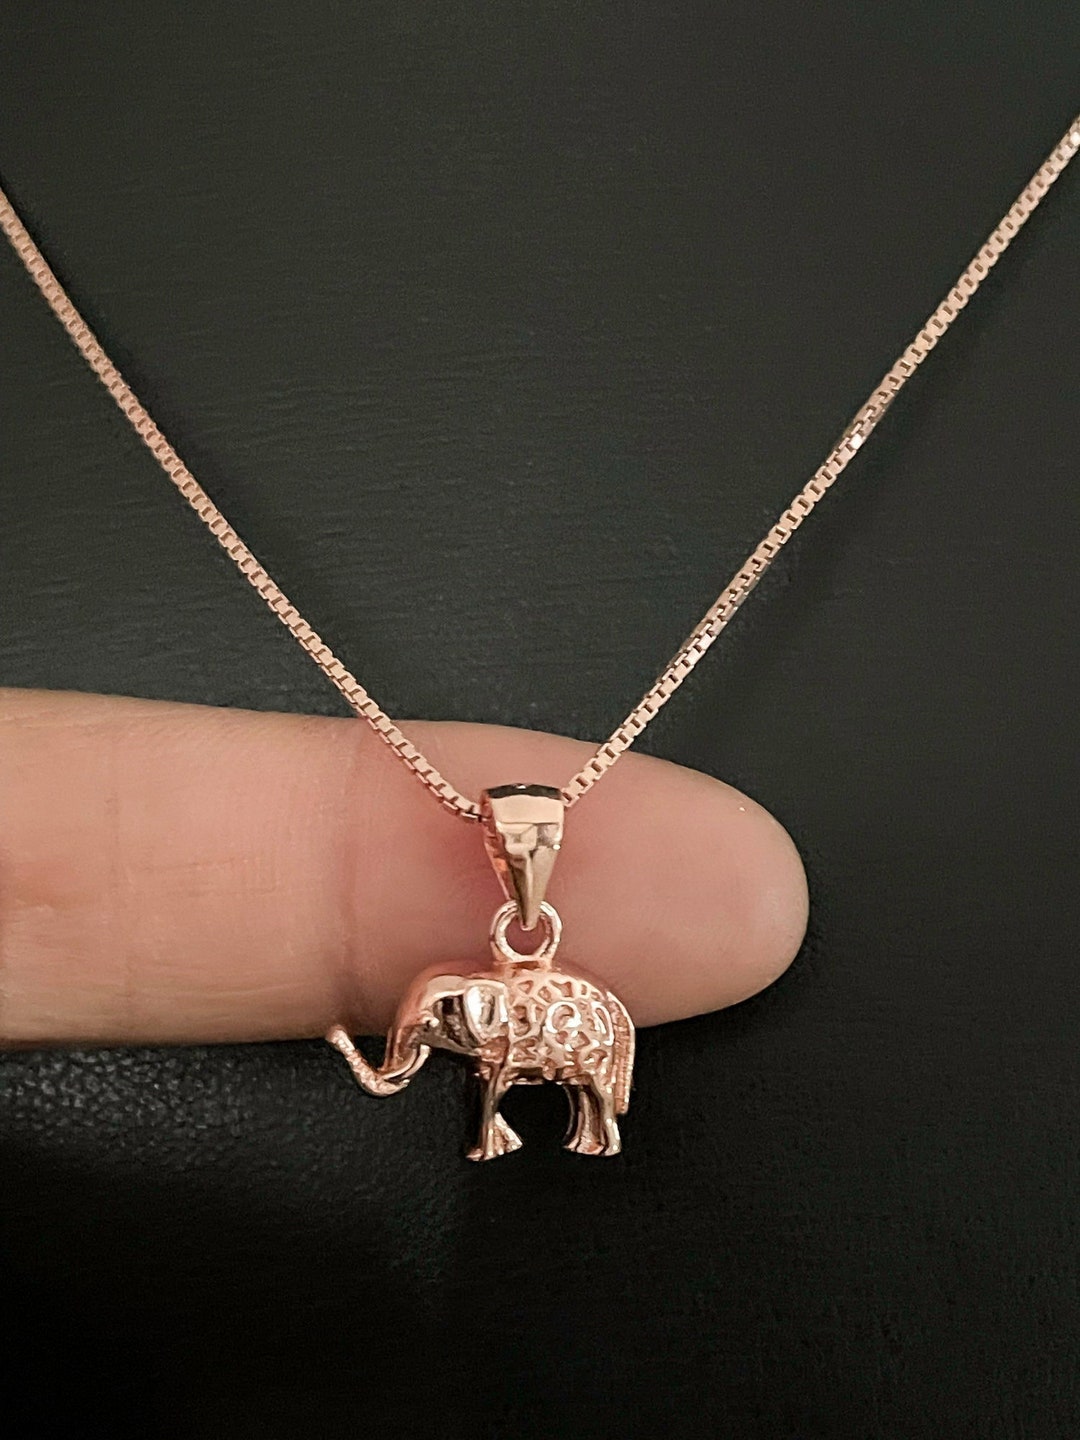 Amazon.com: Personalized 925 Sterling Silver Elephant Baby Pendant Custom  Hand Stamped Initial Letter Tag Crystal Birthstone Charm Chain Customizable  Necklace : Handmade Products